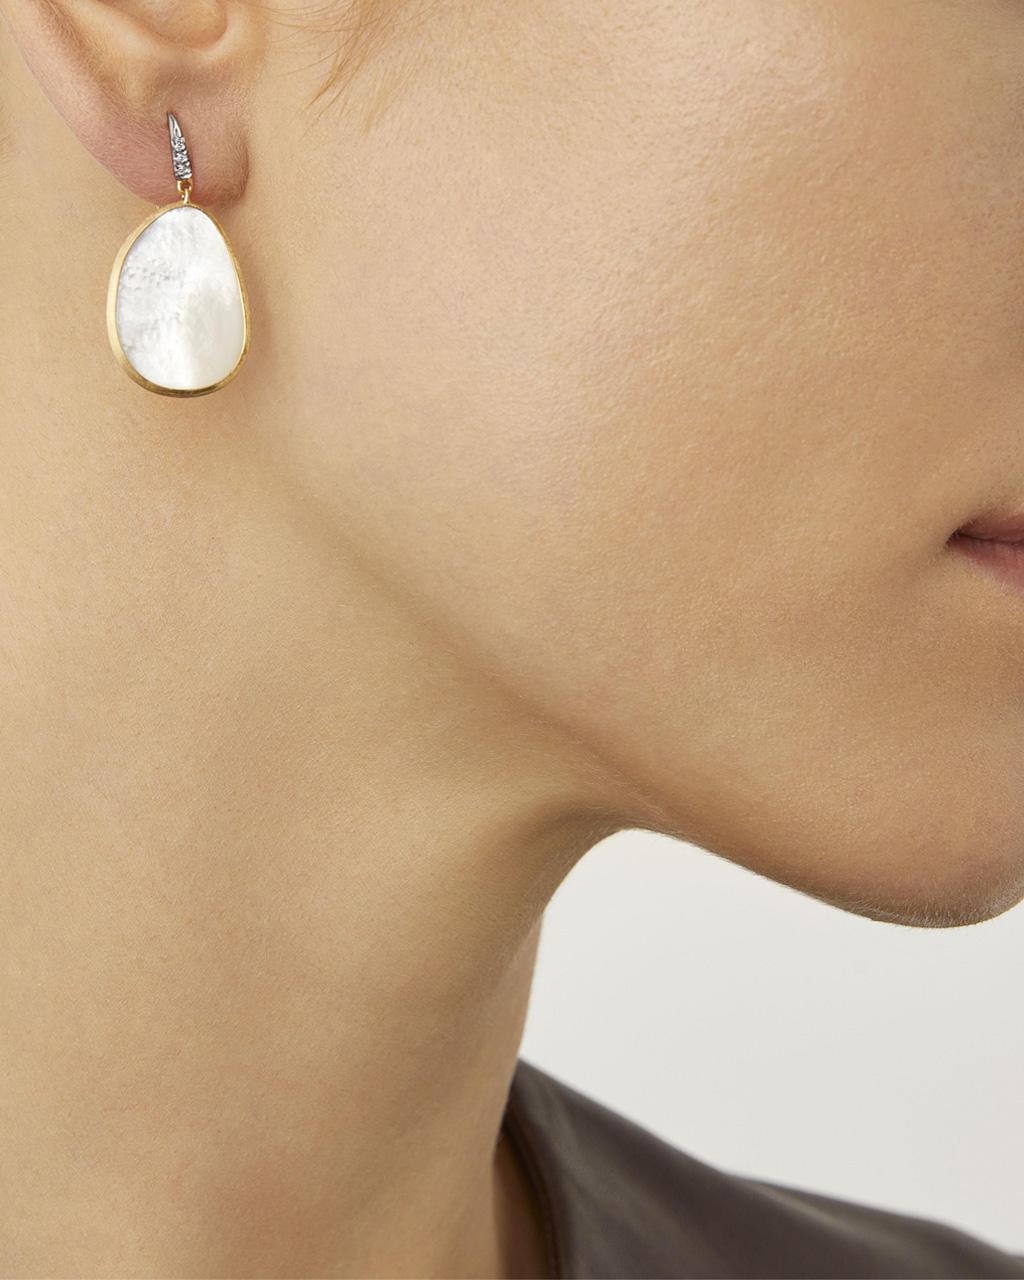 Marco Bicego Lunaria Collection Mother of Pearl Earrings